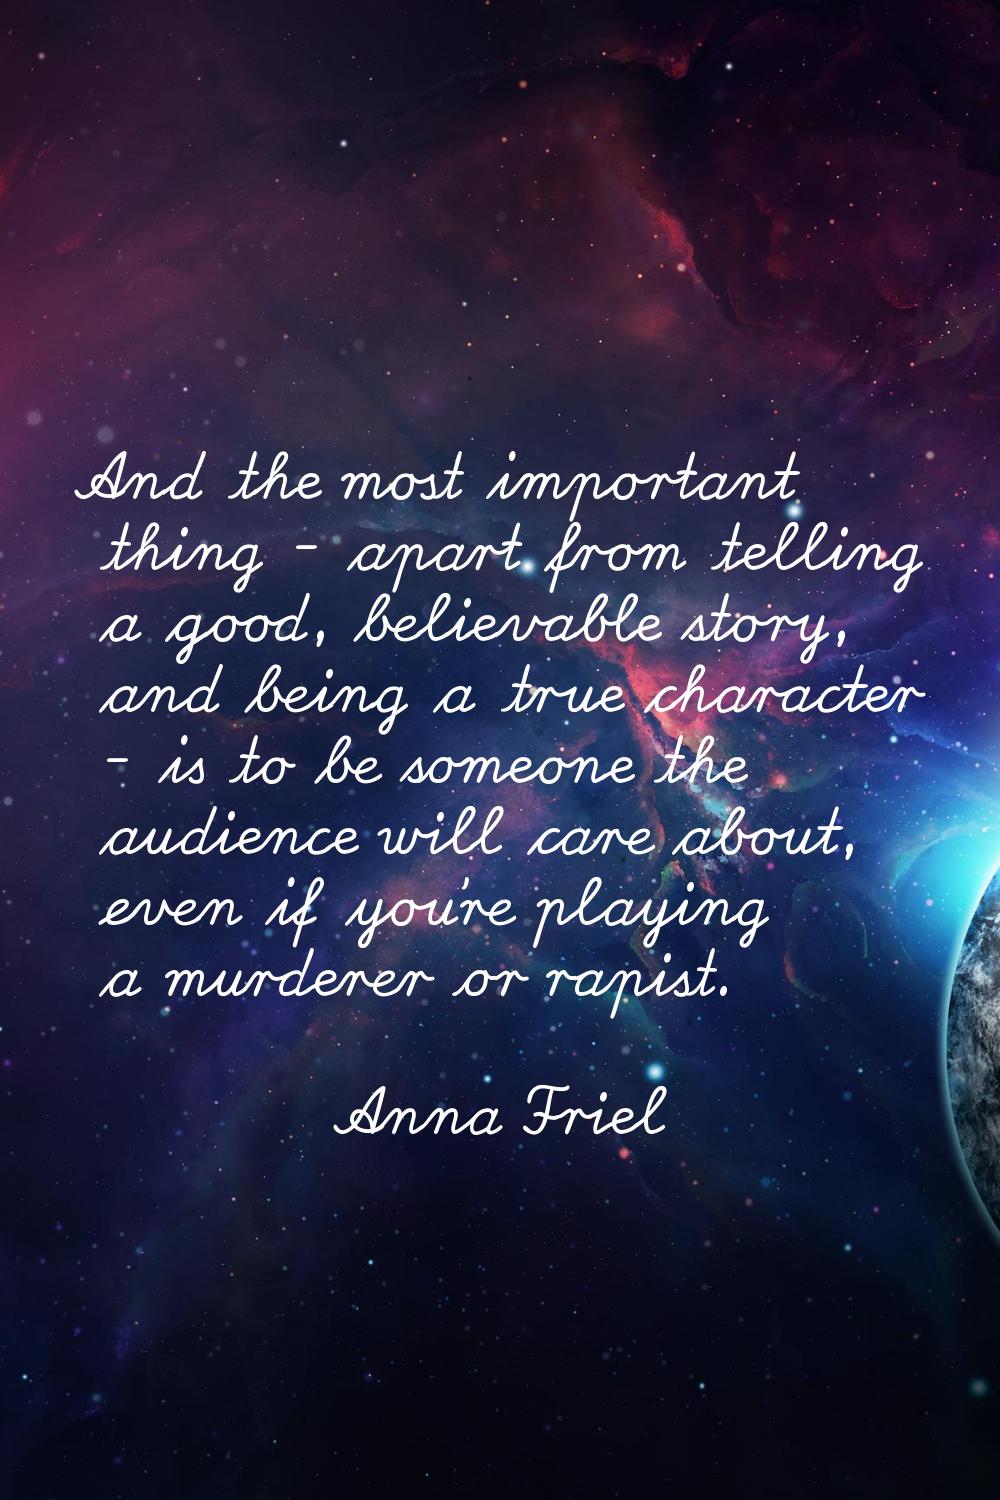 And the most important thing - apart from telling a good, believable story, and being a true charac